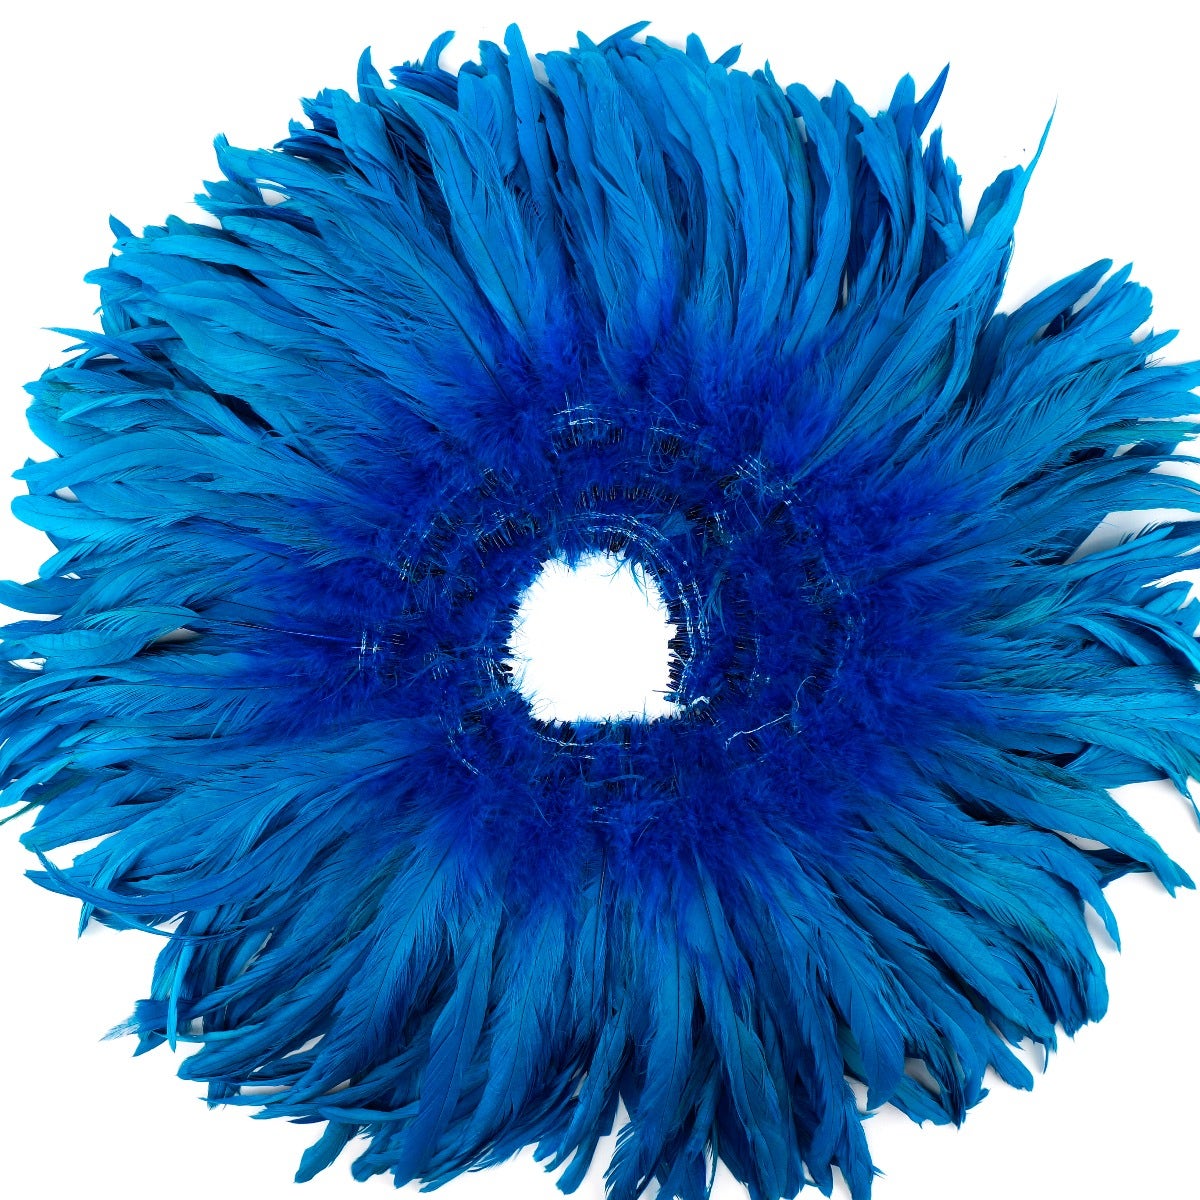 ROOSTER COQUE TAILS FEATHERS BLEACH DYED 7-10” - 1/2 Yard (18") - Dark Turquoise